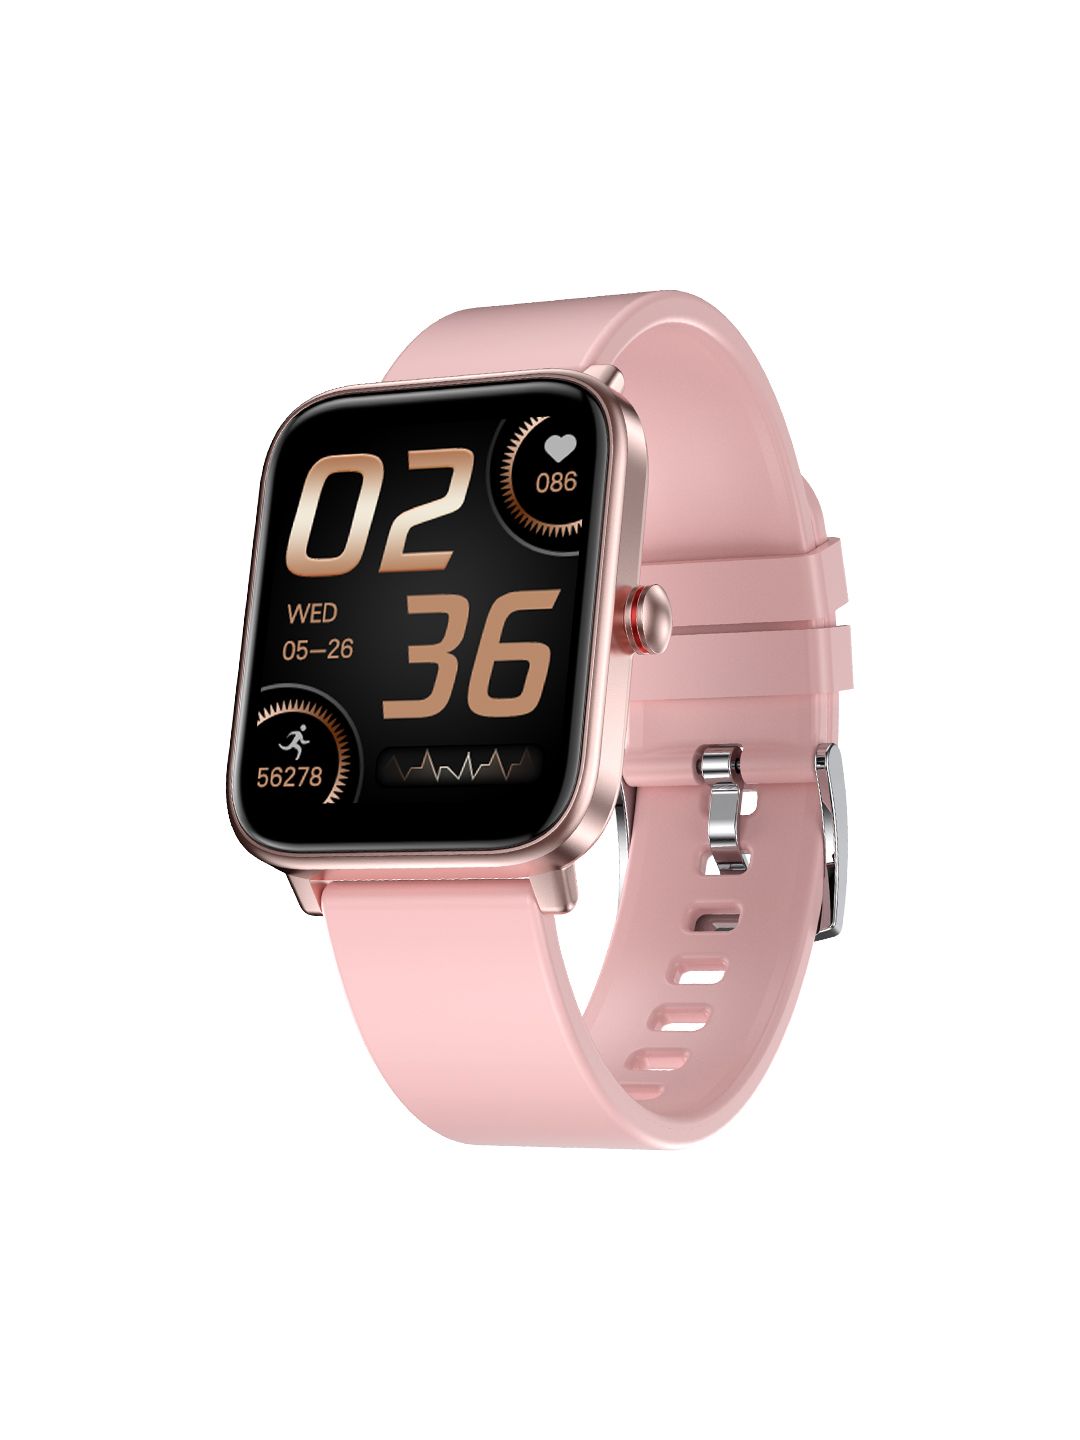 Fire-Boltt Pink Ninja Pro Max Smartwatch with 27 Sports Modes 26BSWAAY Price in India